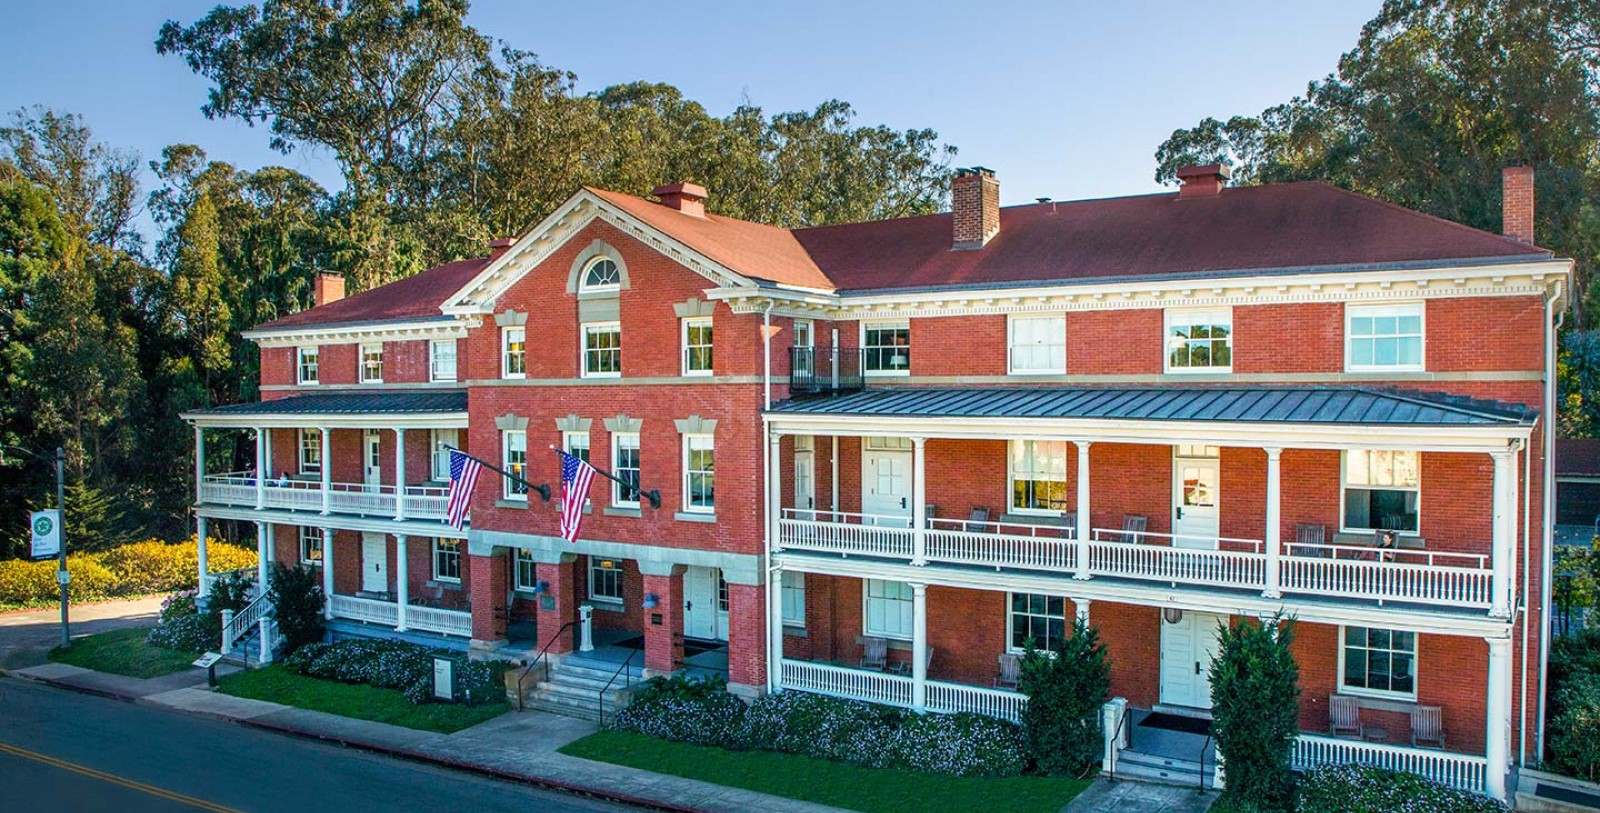 Image of Hotel Exterior, Inn at the Presidio, San Francisco, 1903, Member of Historic Hotels of America since 2011